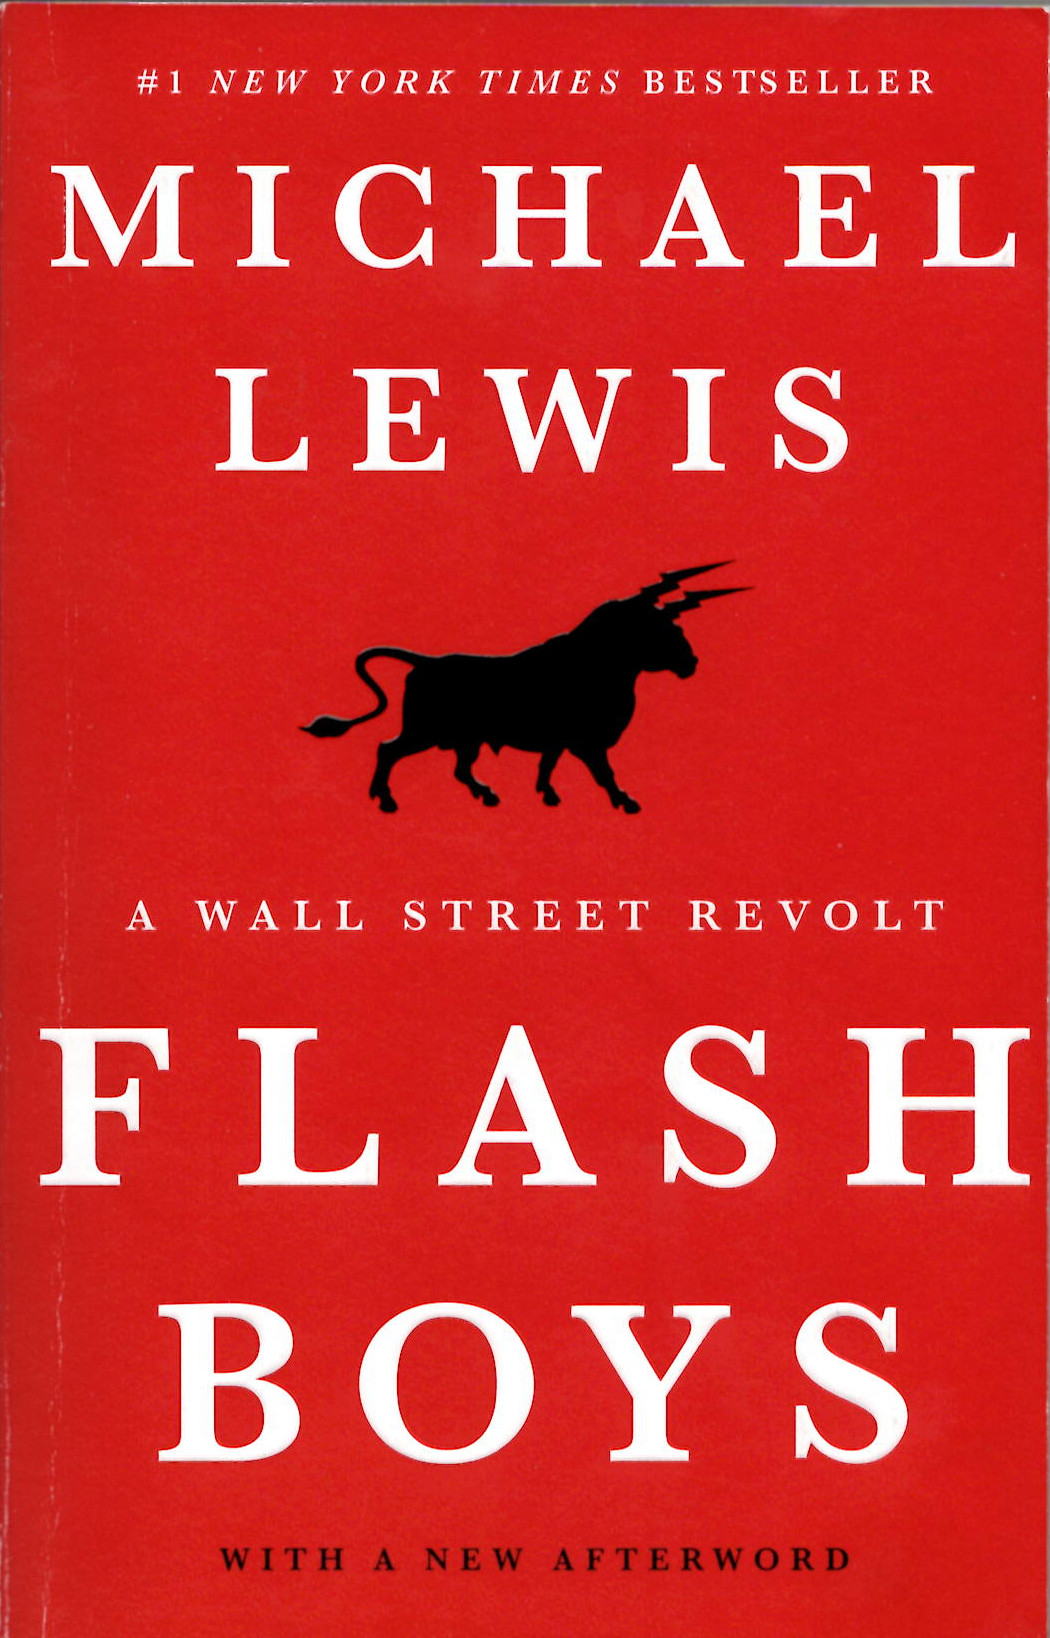 'Flash Boys': Swimming In The Dark Pools With The Sharks